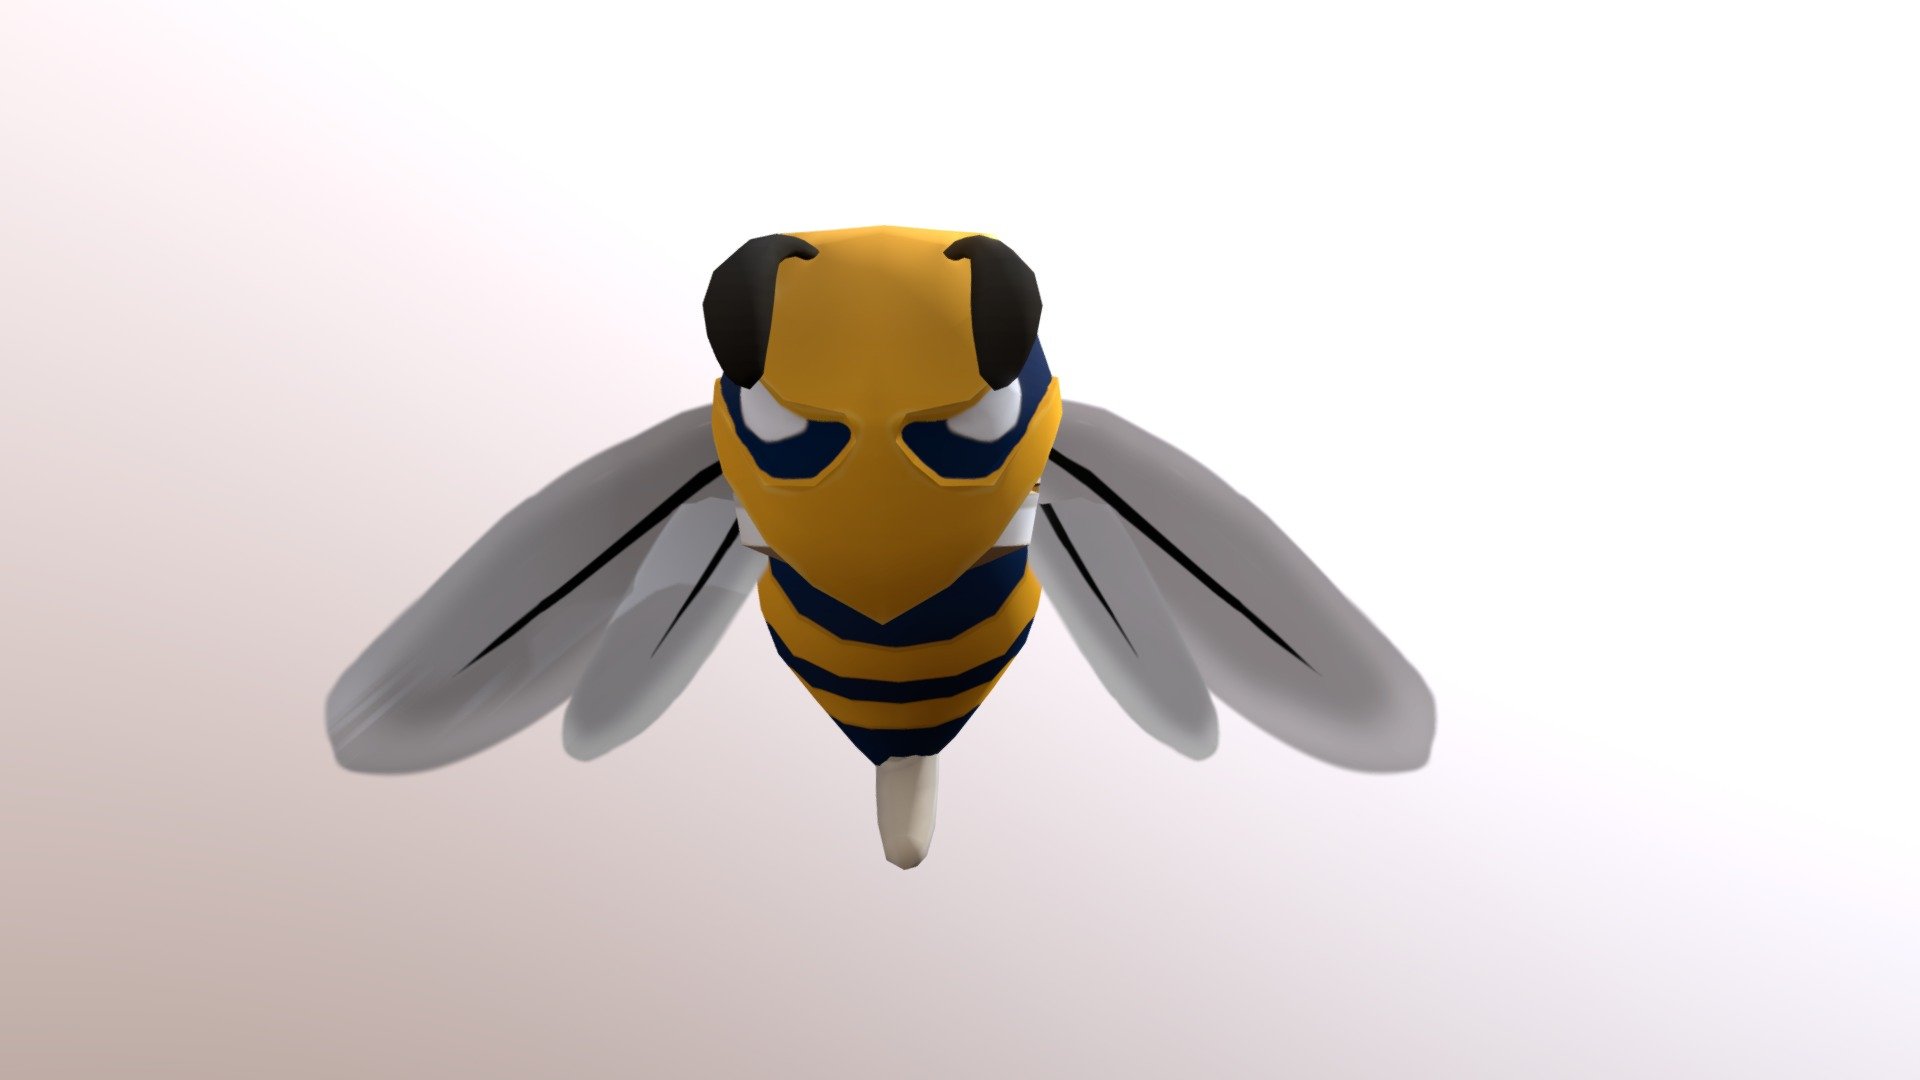 Stylized Bee 3D Model: - Lowpoly (Tris: 1630 - Verts: 913) - Game ready with Unity Package, optimized for VR/AR apps - Texture Maps includes: Basecolor - Model is created in Maya, other files supported includes: Blender, FBX, Glb/Gltf, Unity

2 animations: - 20-38: Fly - 50-66: Attack - 40-56 - Lowpoly Stylized Bee Rigged and Animated - 3D model by vukhiemton 3d model